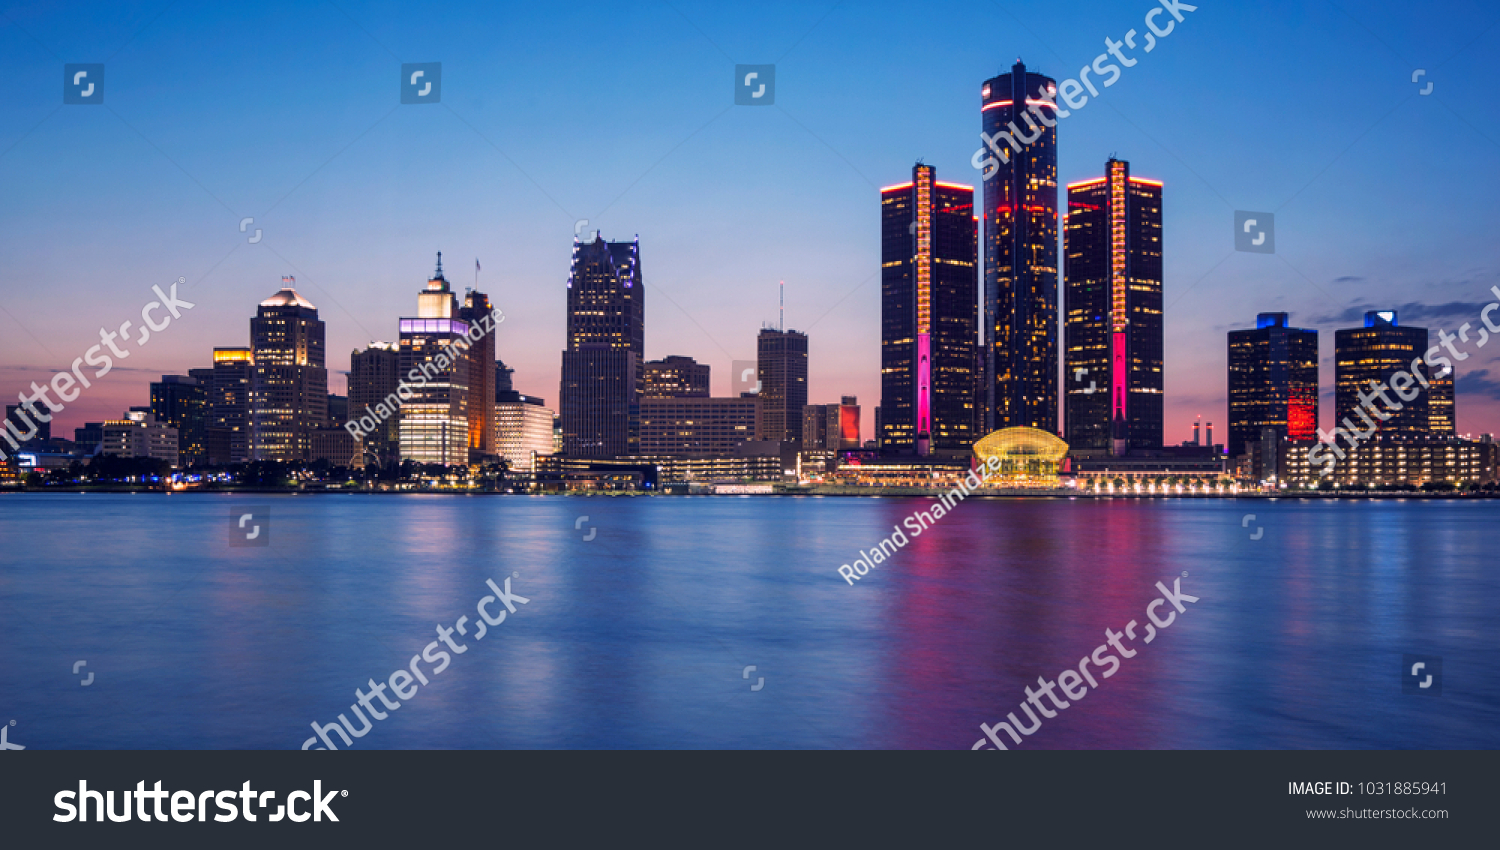 Blue hour of Detroit Skyline from Windsor, Ontario, Canada.  #1031885941